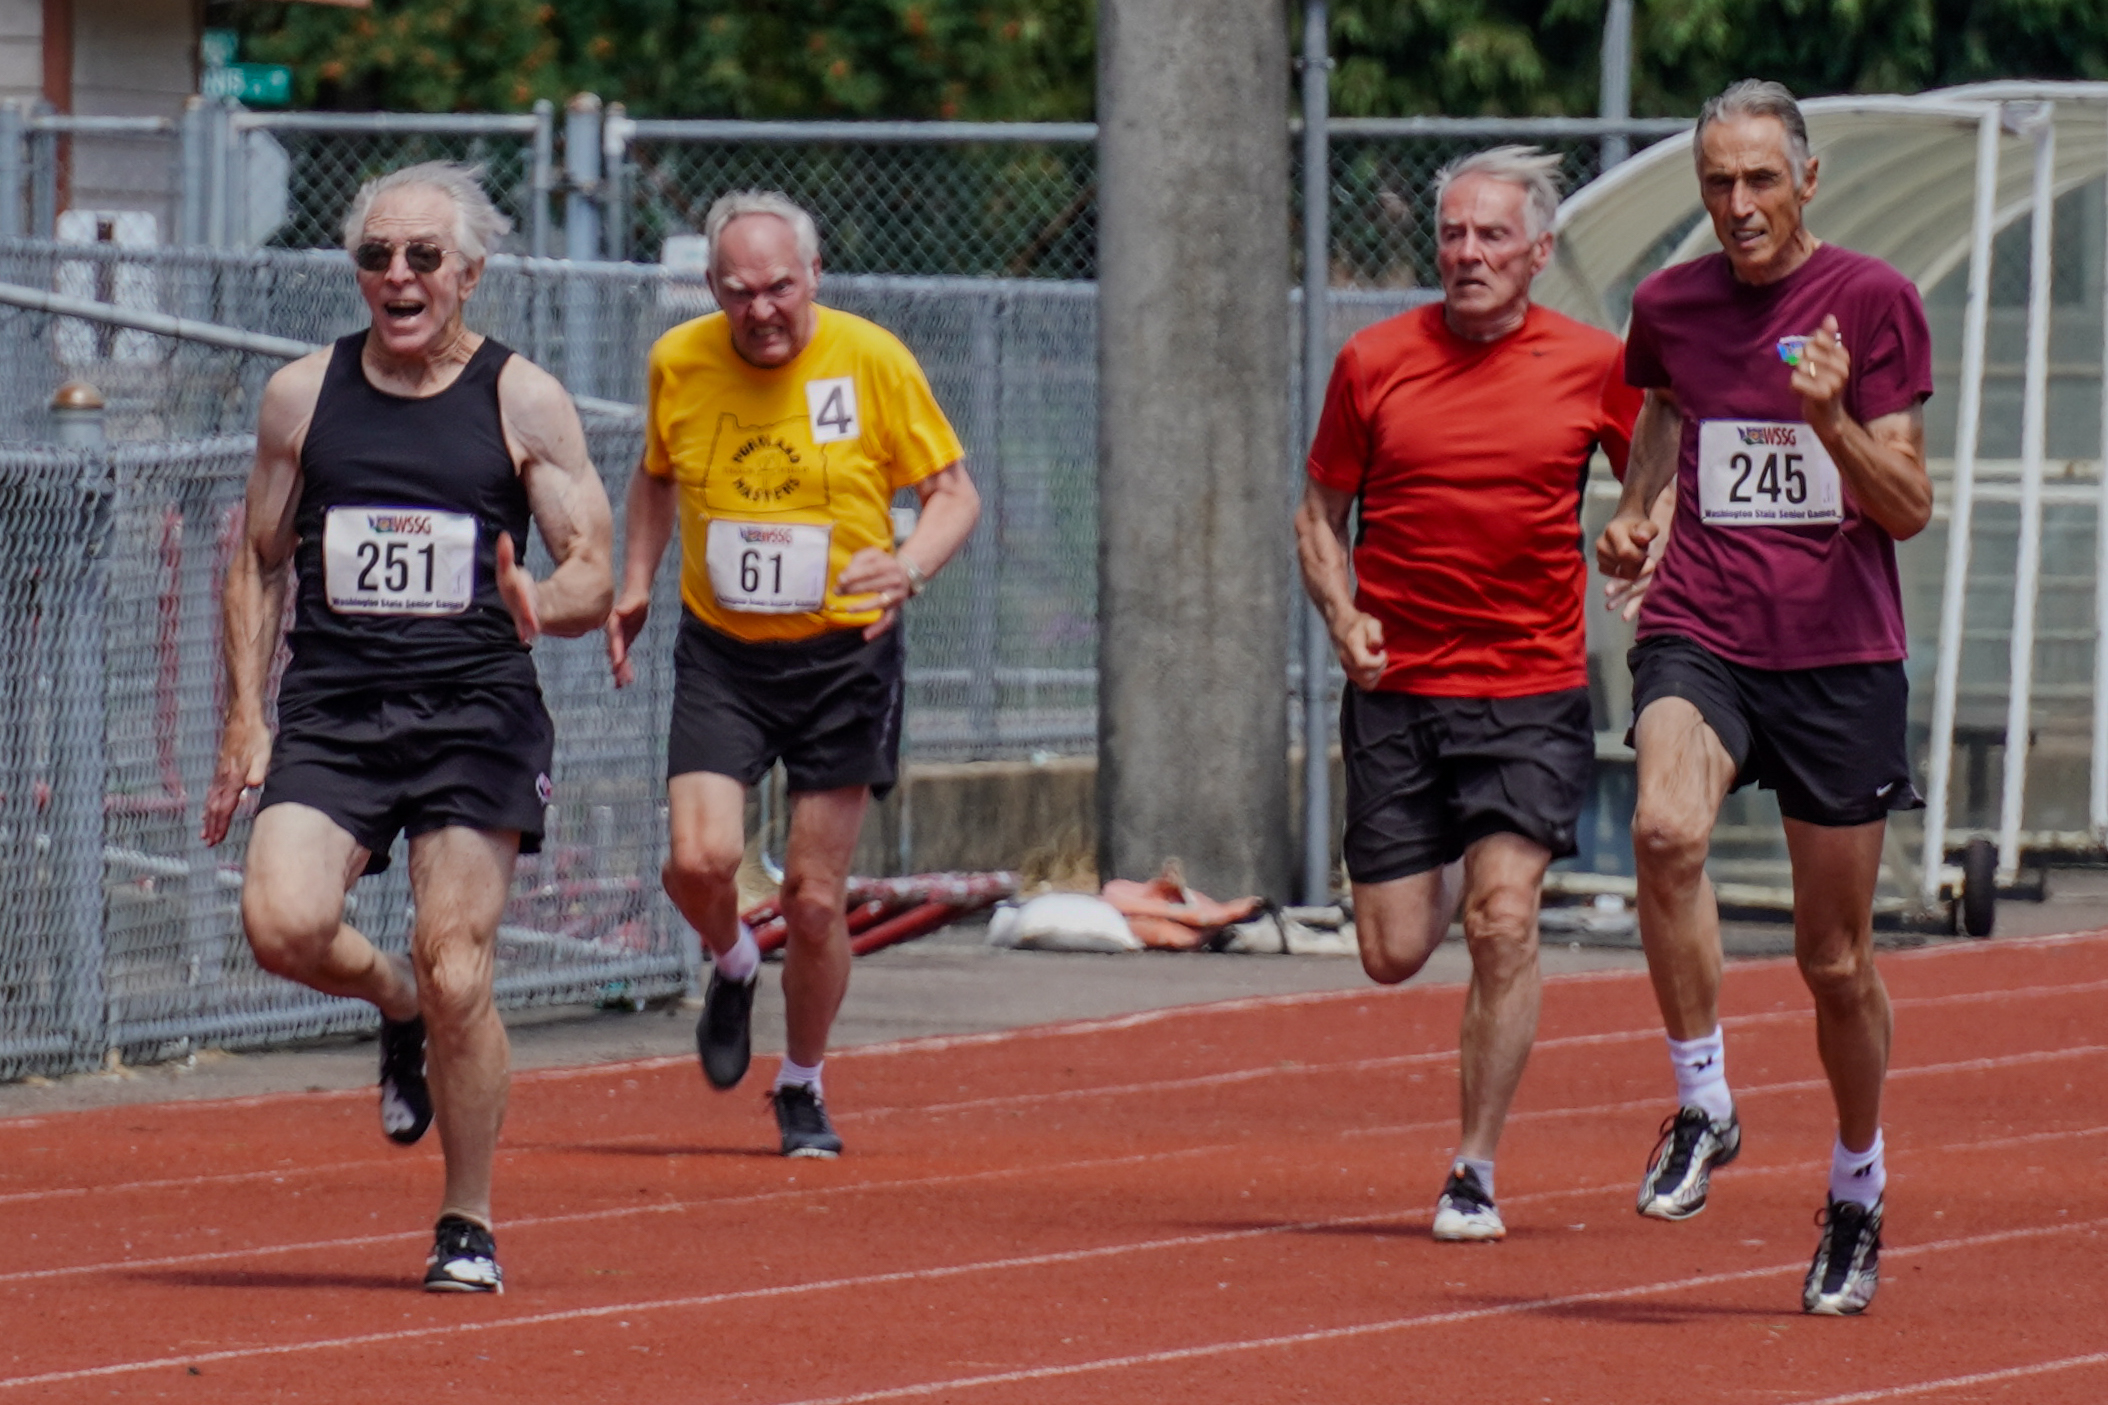 Photos from the Track & Field 100 Meter event on July 22nd